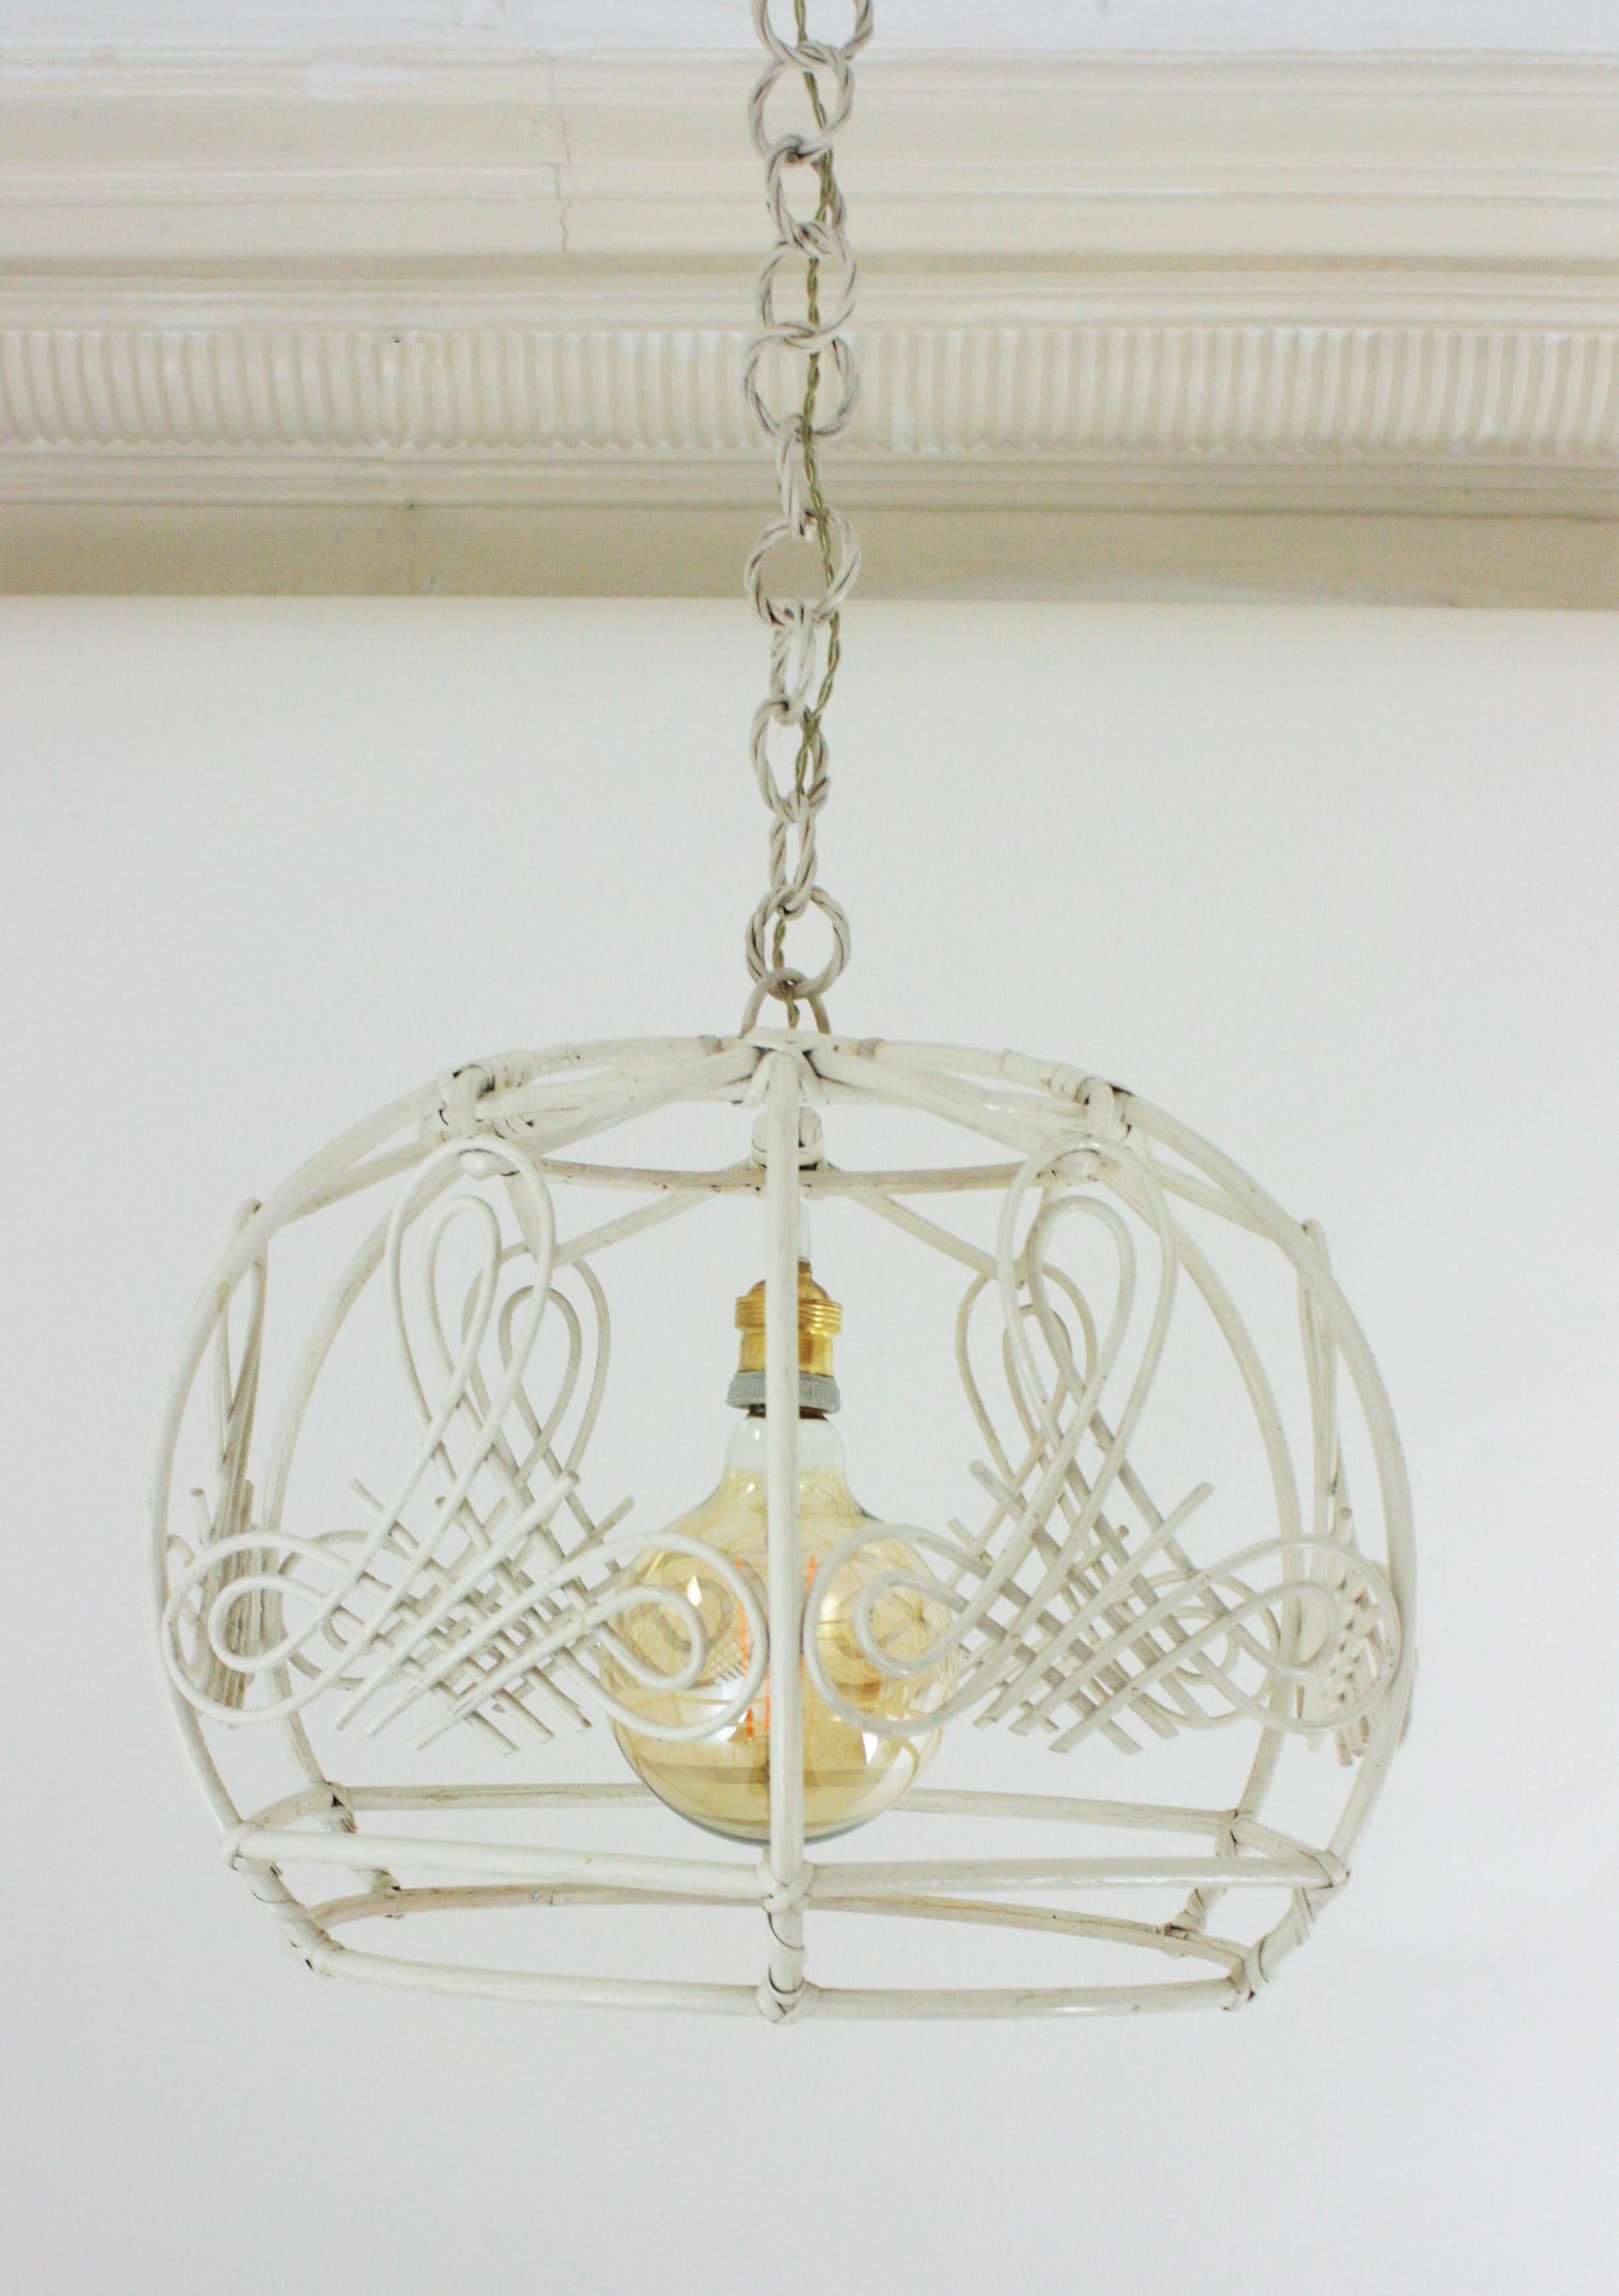 French Rattan Bell Pendant Lamp / Lantern in White Patina, 1960s For Sale 11